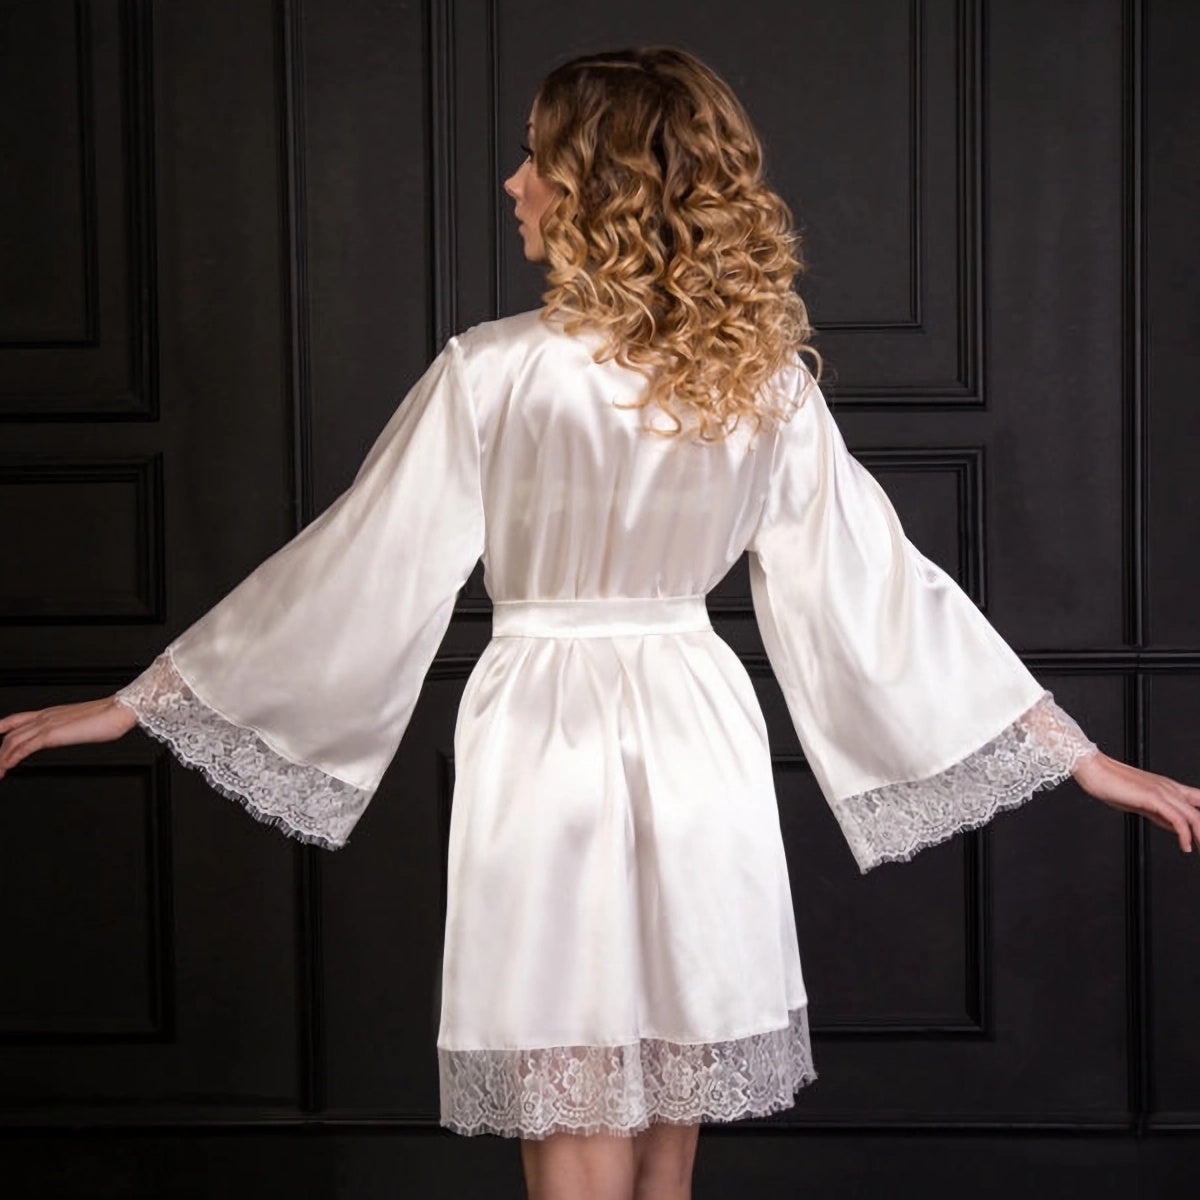 Bachelorette Party Gift: White Lace-Trimmed Satin Robe